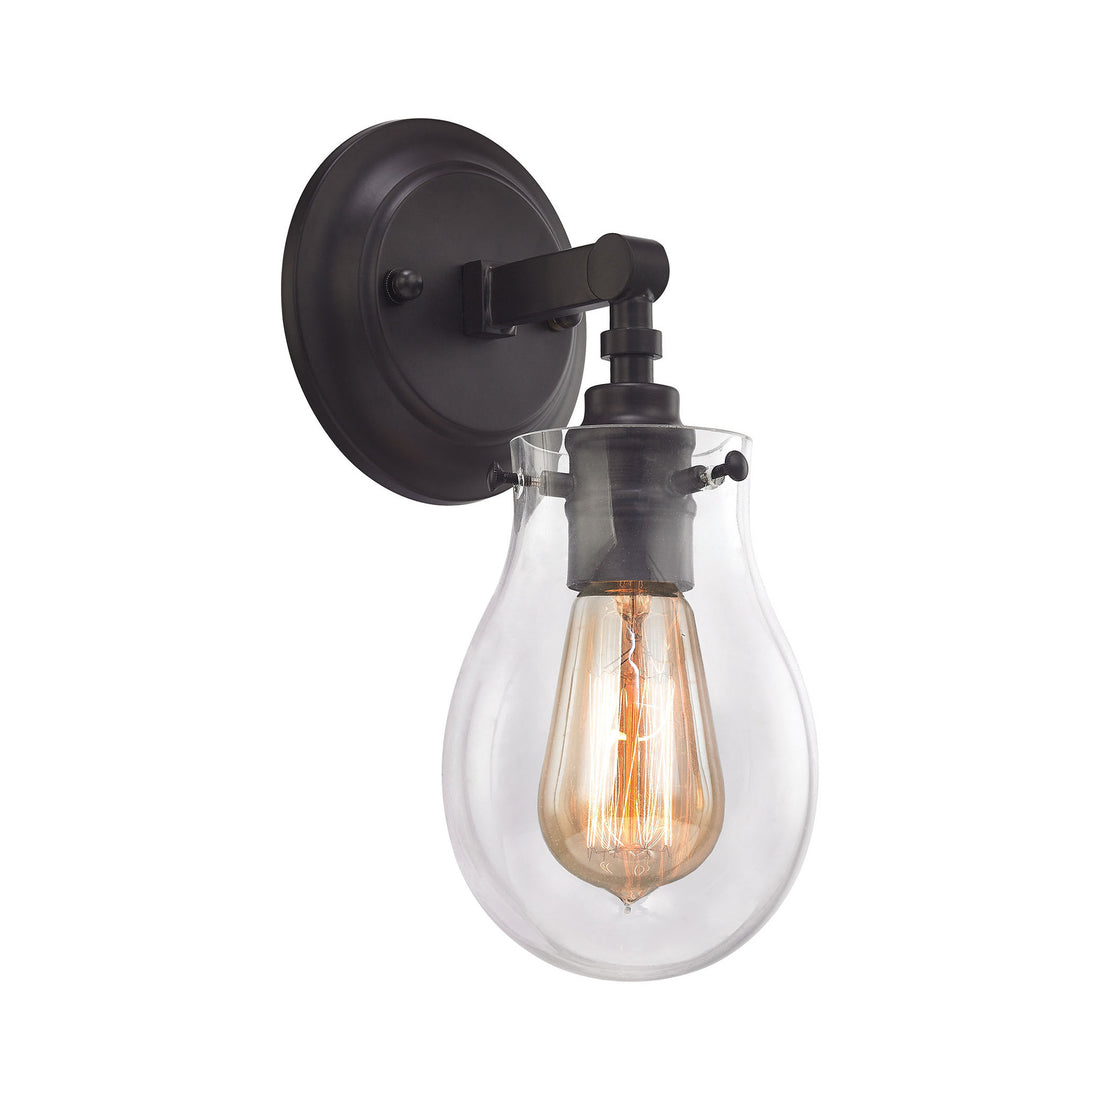 1 light Jaelyn Vanity Sconce in Oil Rubbed Bronze with clear teardrop glass shade by Elk Lighting 31930/1